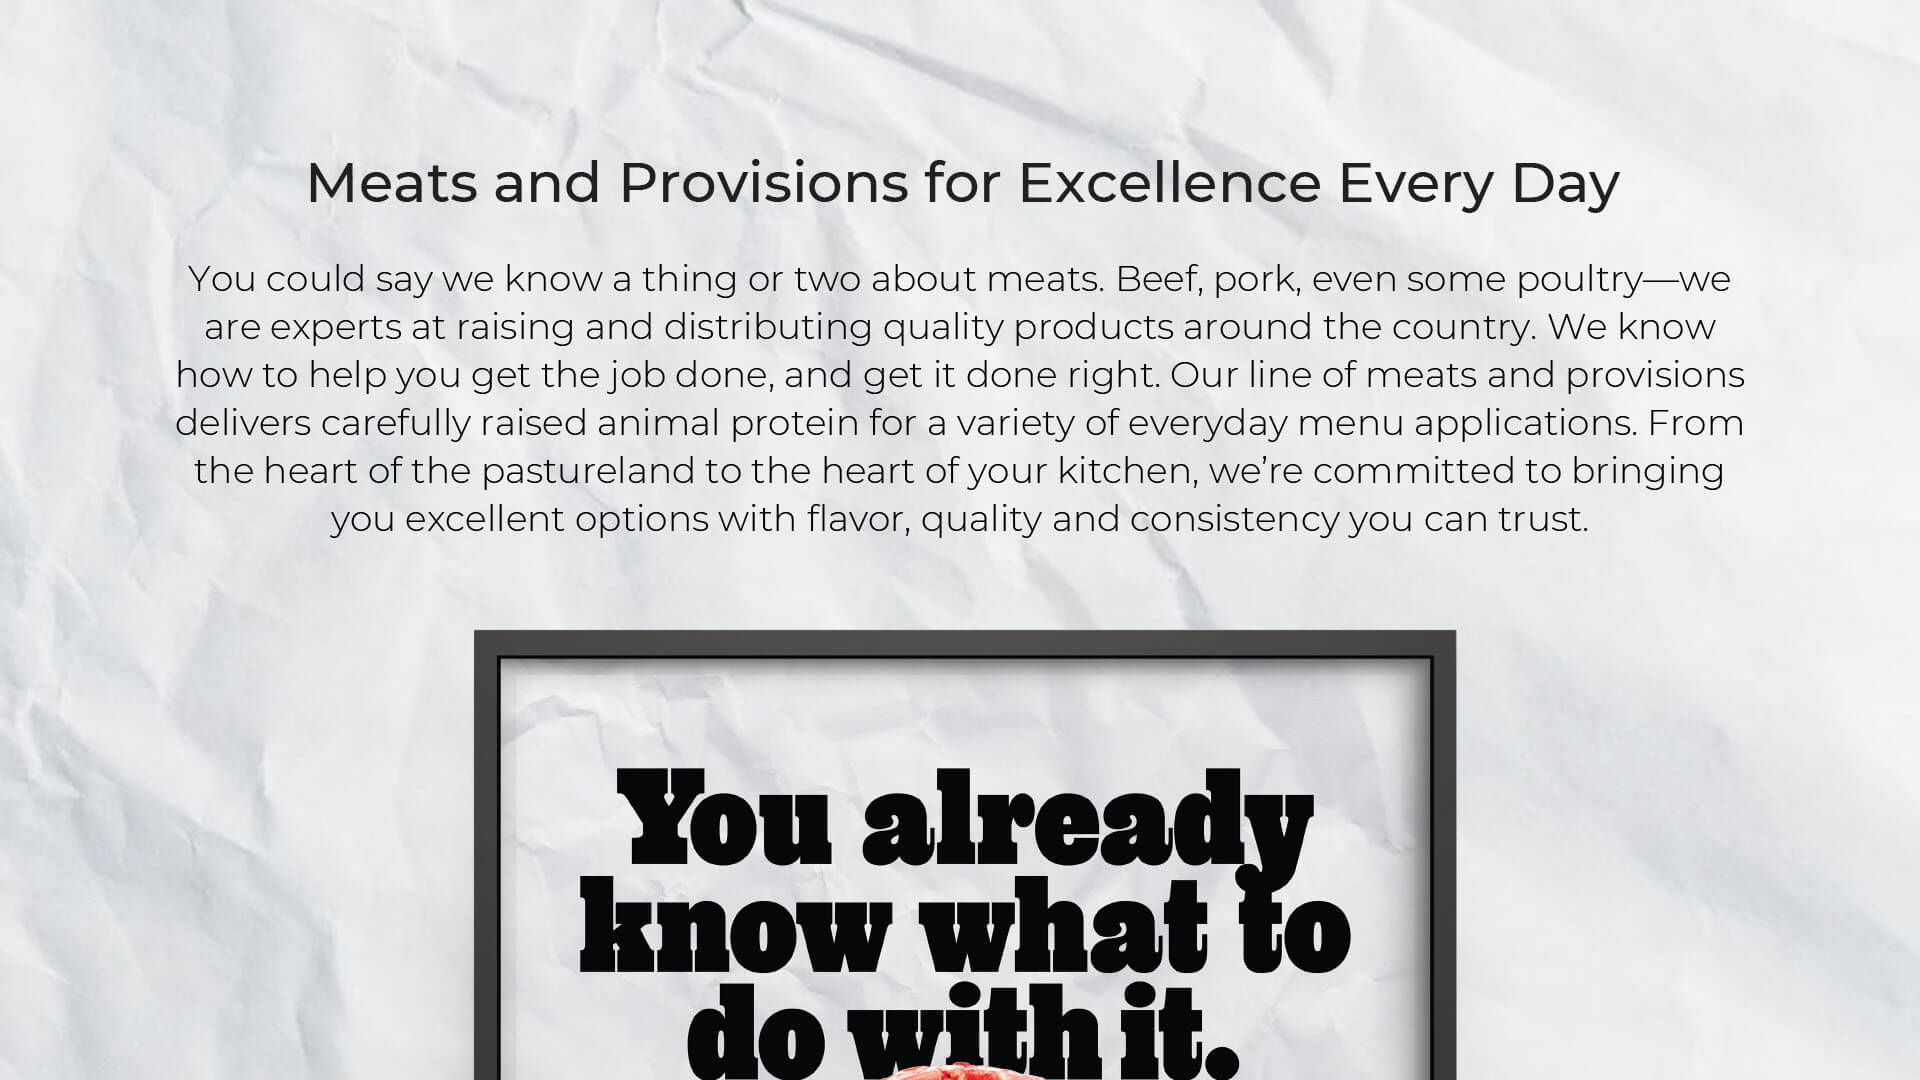 Meats and Provisions for Excellence Every Day – You could say we know a thing or two about meats. Beef, pork, even some poultry—we are experts at raising and distributing quality products around the country. We know how to help you get the job done, and get it done right. Our line of meats and provisions delivers carefully raised animal protein for a variety of everyday menu applications. From the heart of the pastureland to the heart of your kitchen, we’re committed to bringing you excellent options with flavor, quality and consistency you can trust.